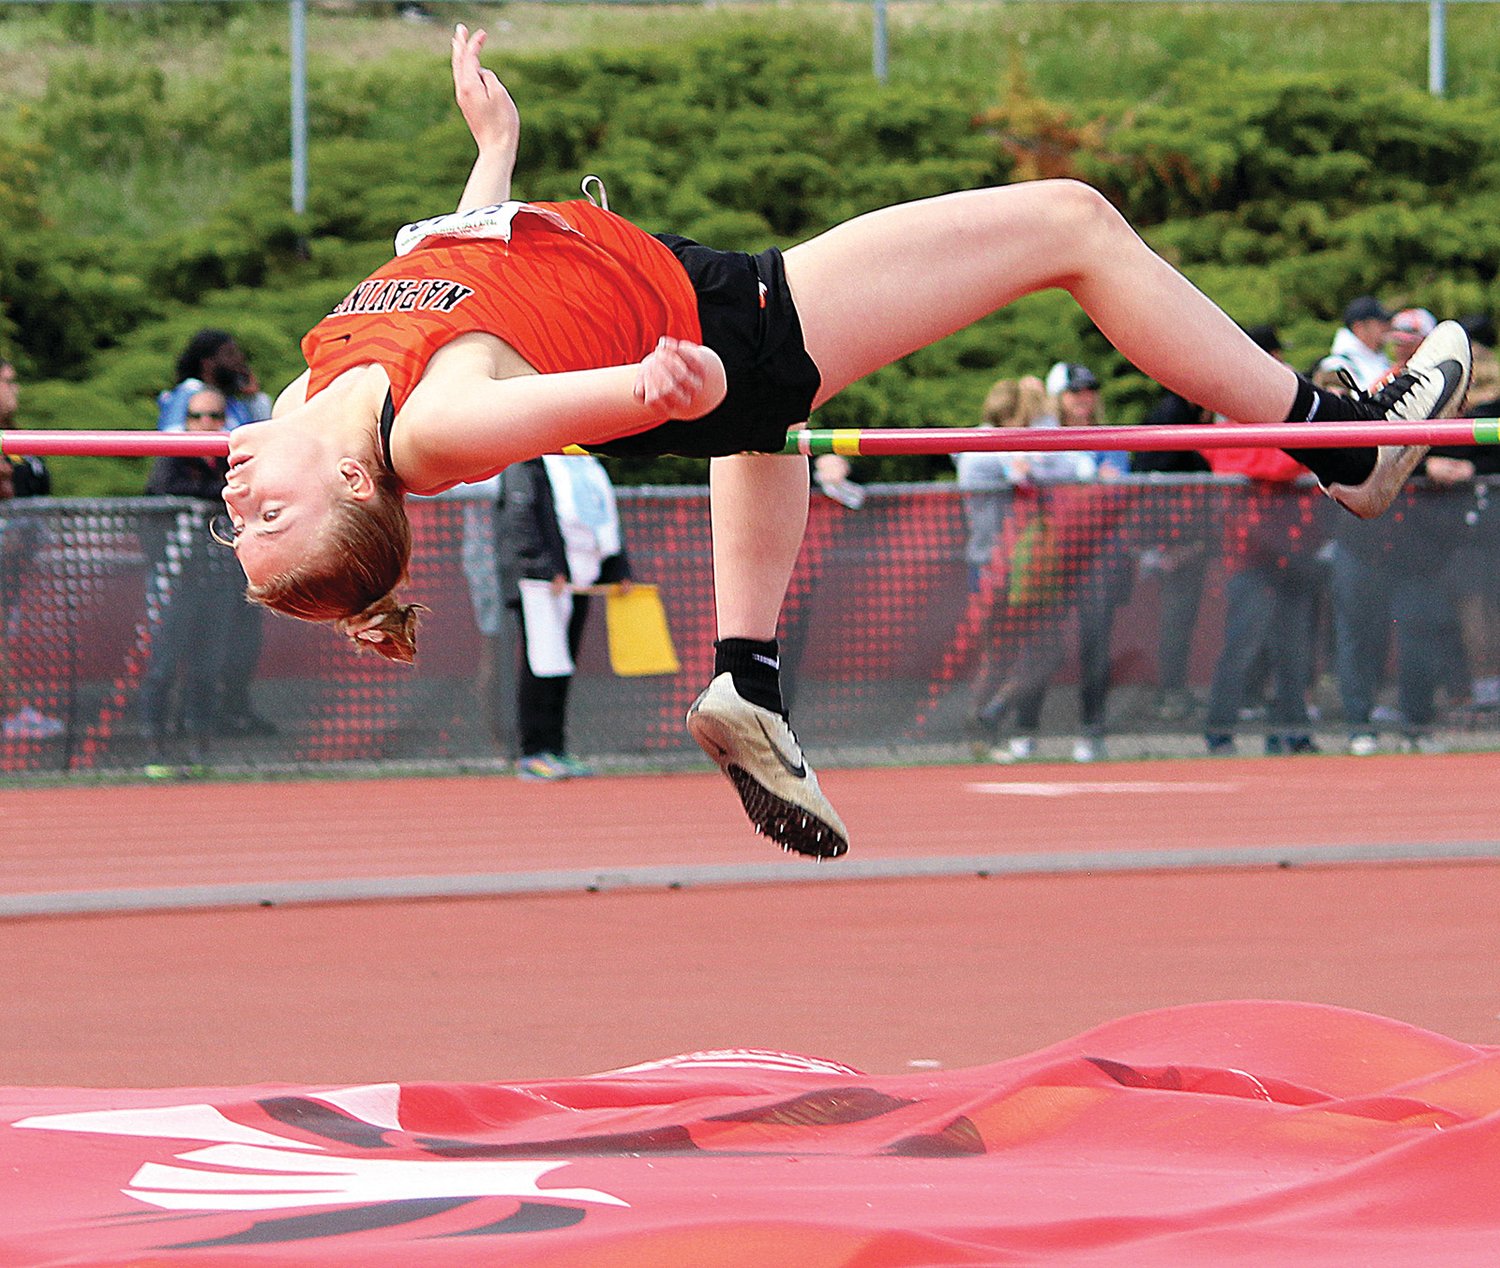 Napavine's Keira O'Neill clears the high jump bar during the State 1B/2B/1A Track and Field Championships in Cheney, WA on May 28, 2022.